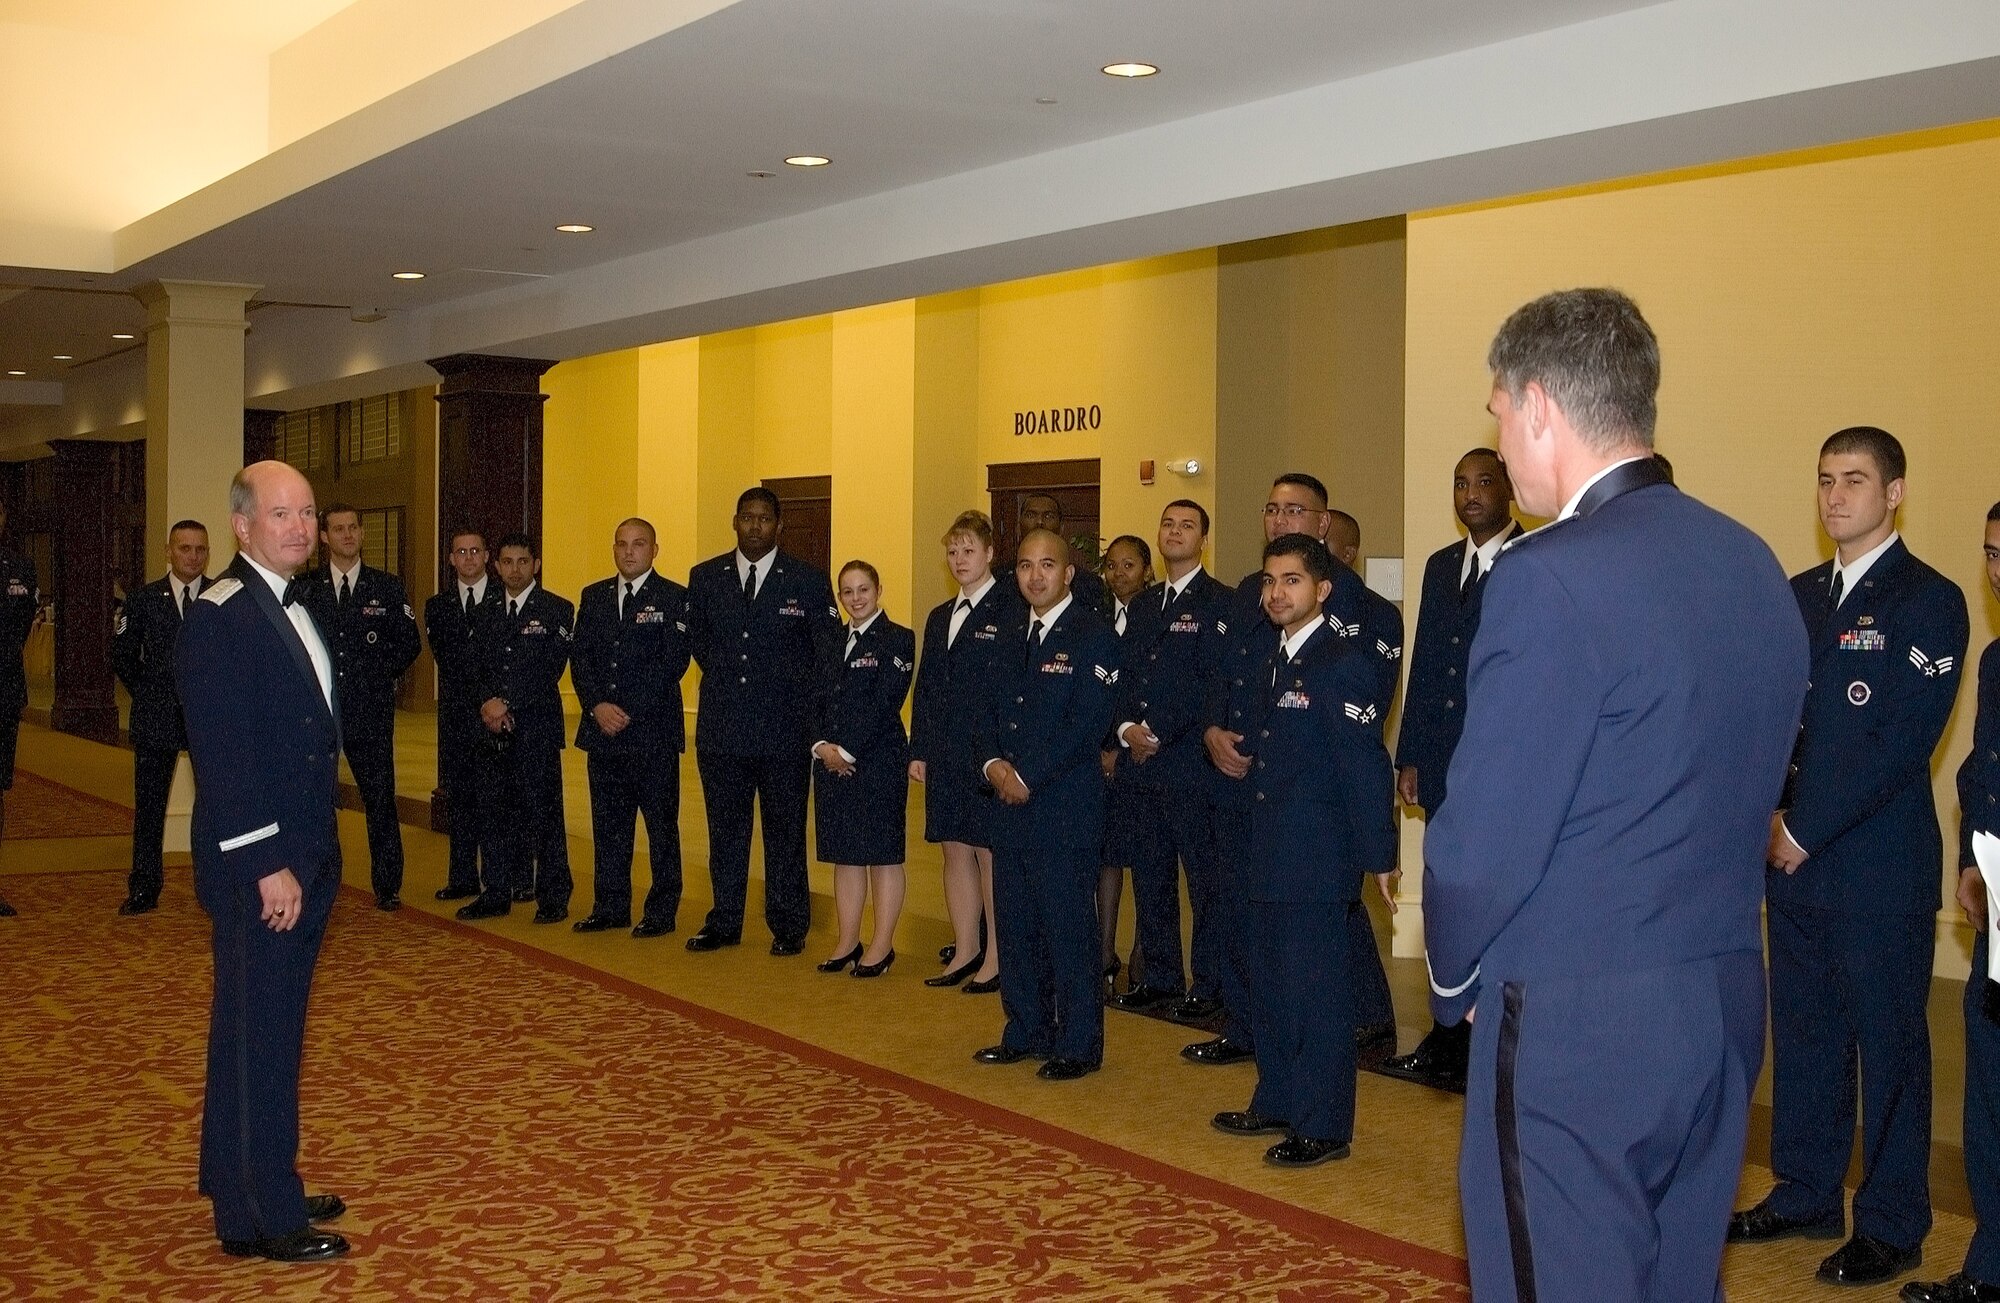 General McNabb and Col. Sam Cox, 436th Airlift Wing commander, meet with Dover Air Force Base’s Airman Leadership School Class 06-H during the Air Force Ball Saturday at the Sheraton in Dover. The class volunteered to escort, greet, and check coats for the ball as a part of a mandatory ALS community project. (U.S. Air Force photo/Jennie Hess)